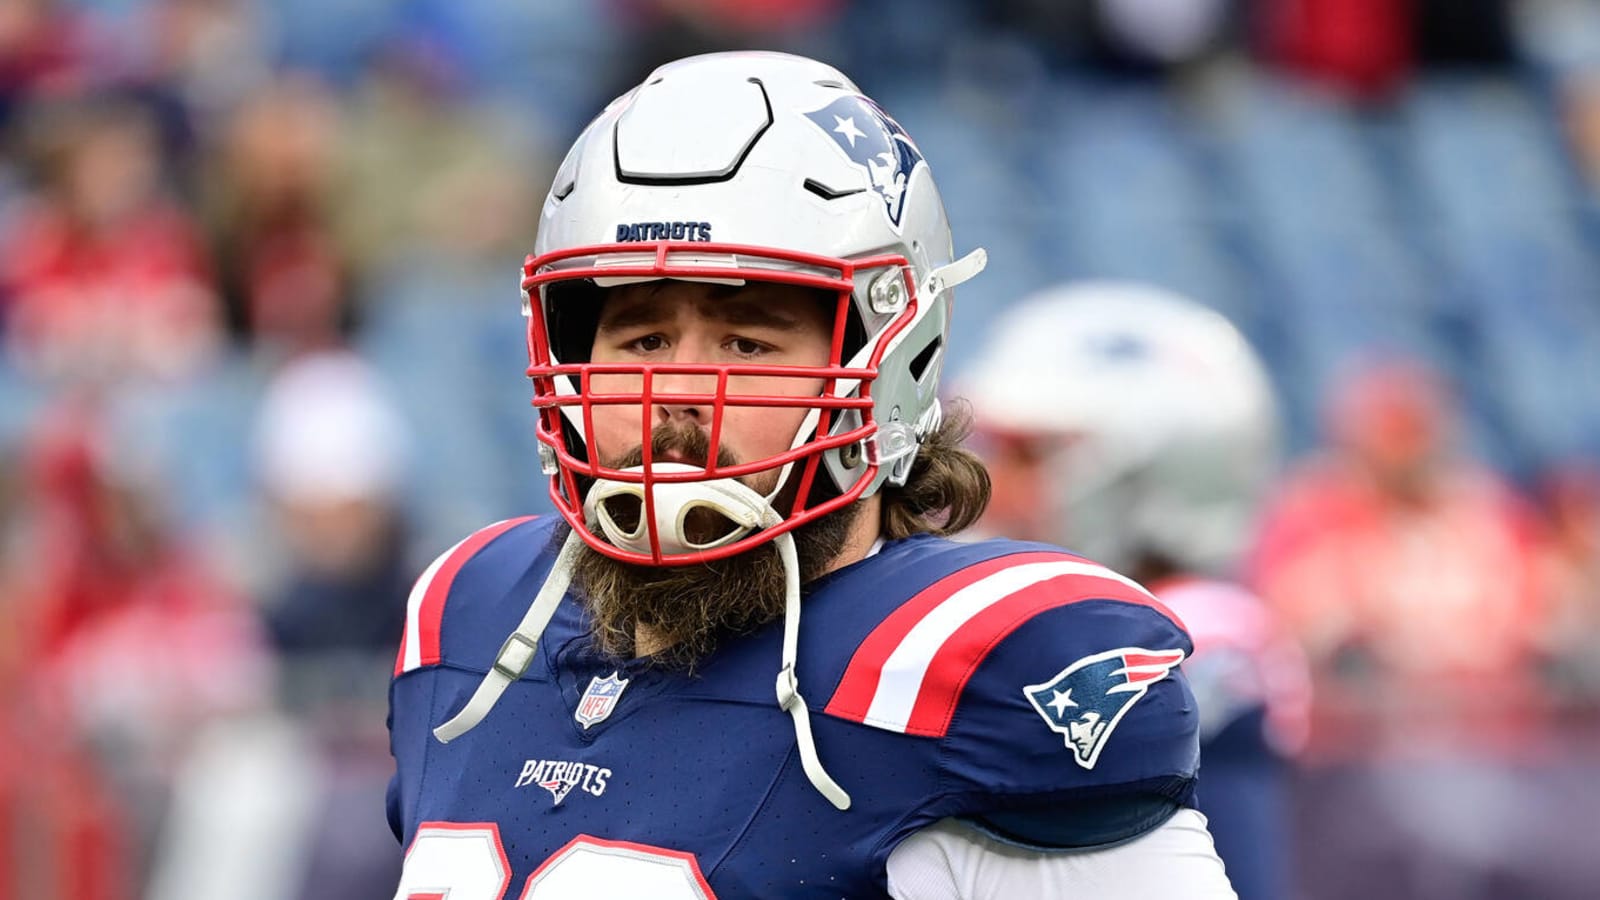 Patriots sign veteran center to two-year extension